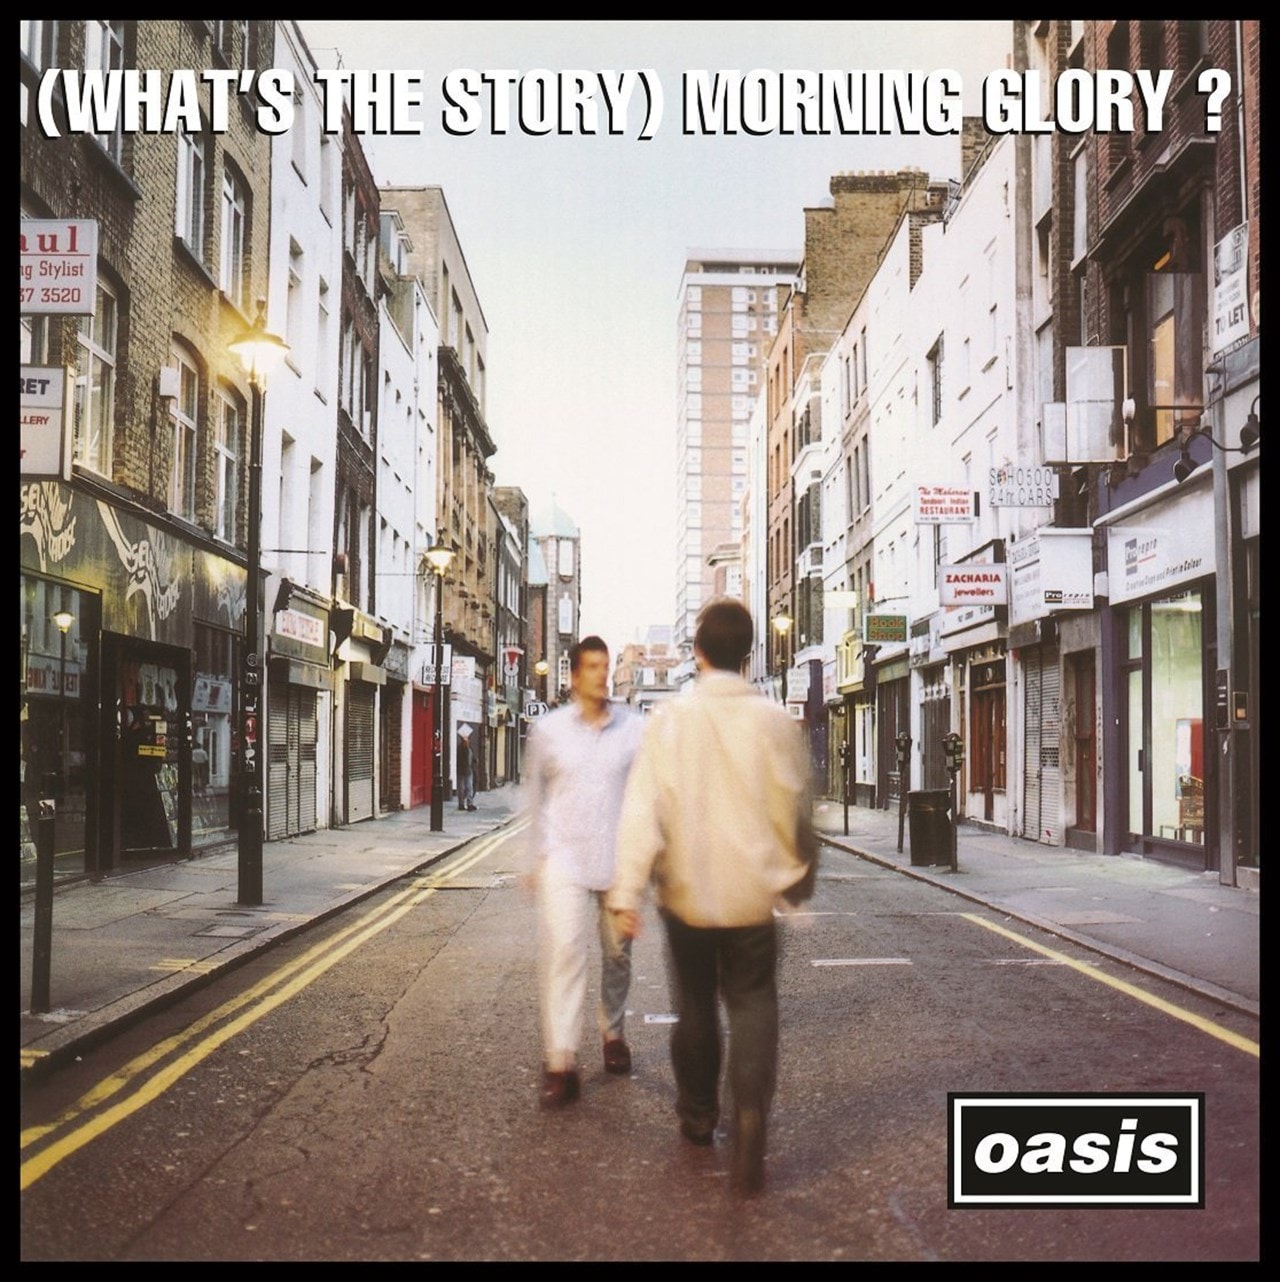 Oasis - (What's The Story) Morning Glory? - RKIDLP73C - BIG BROTHER